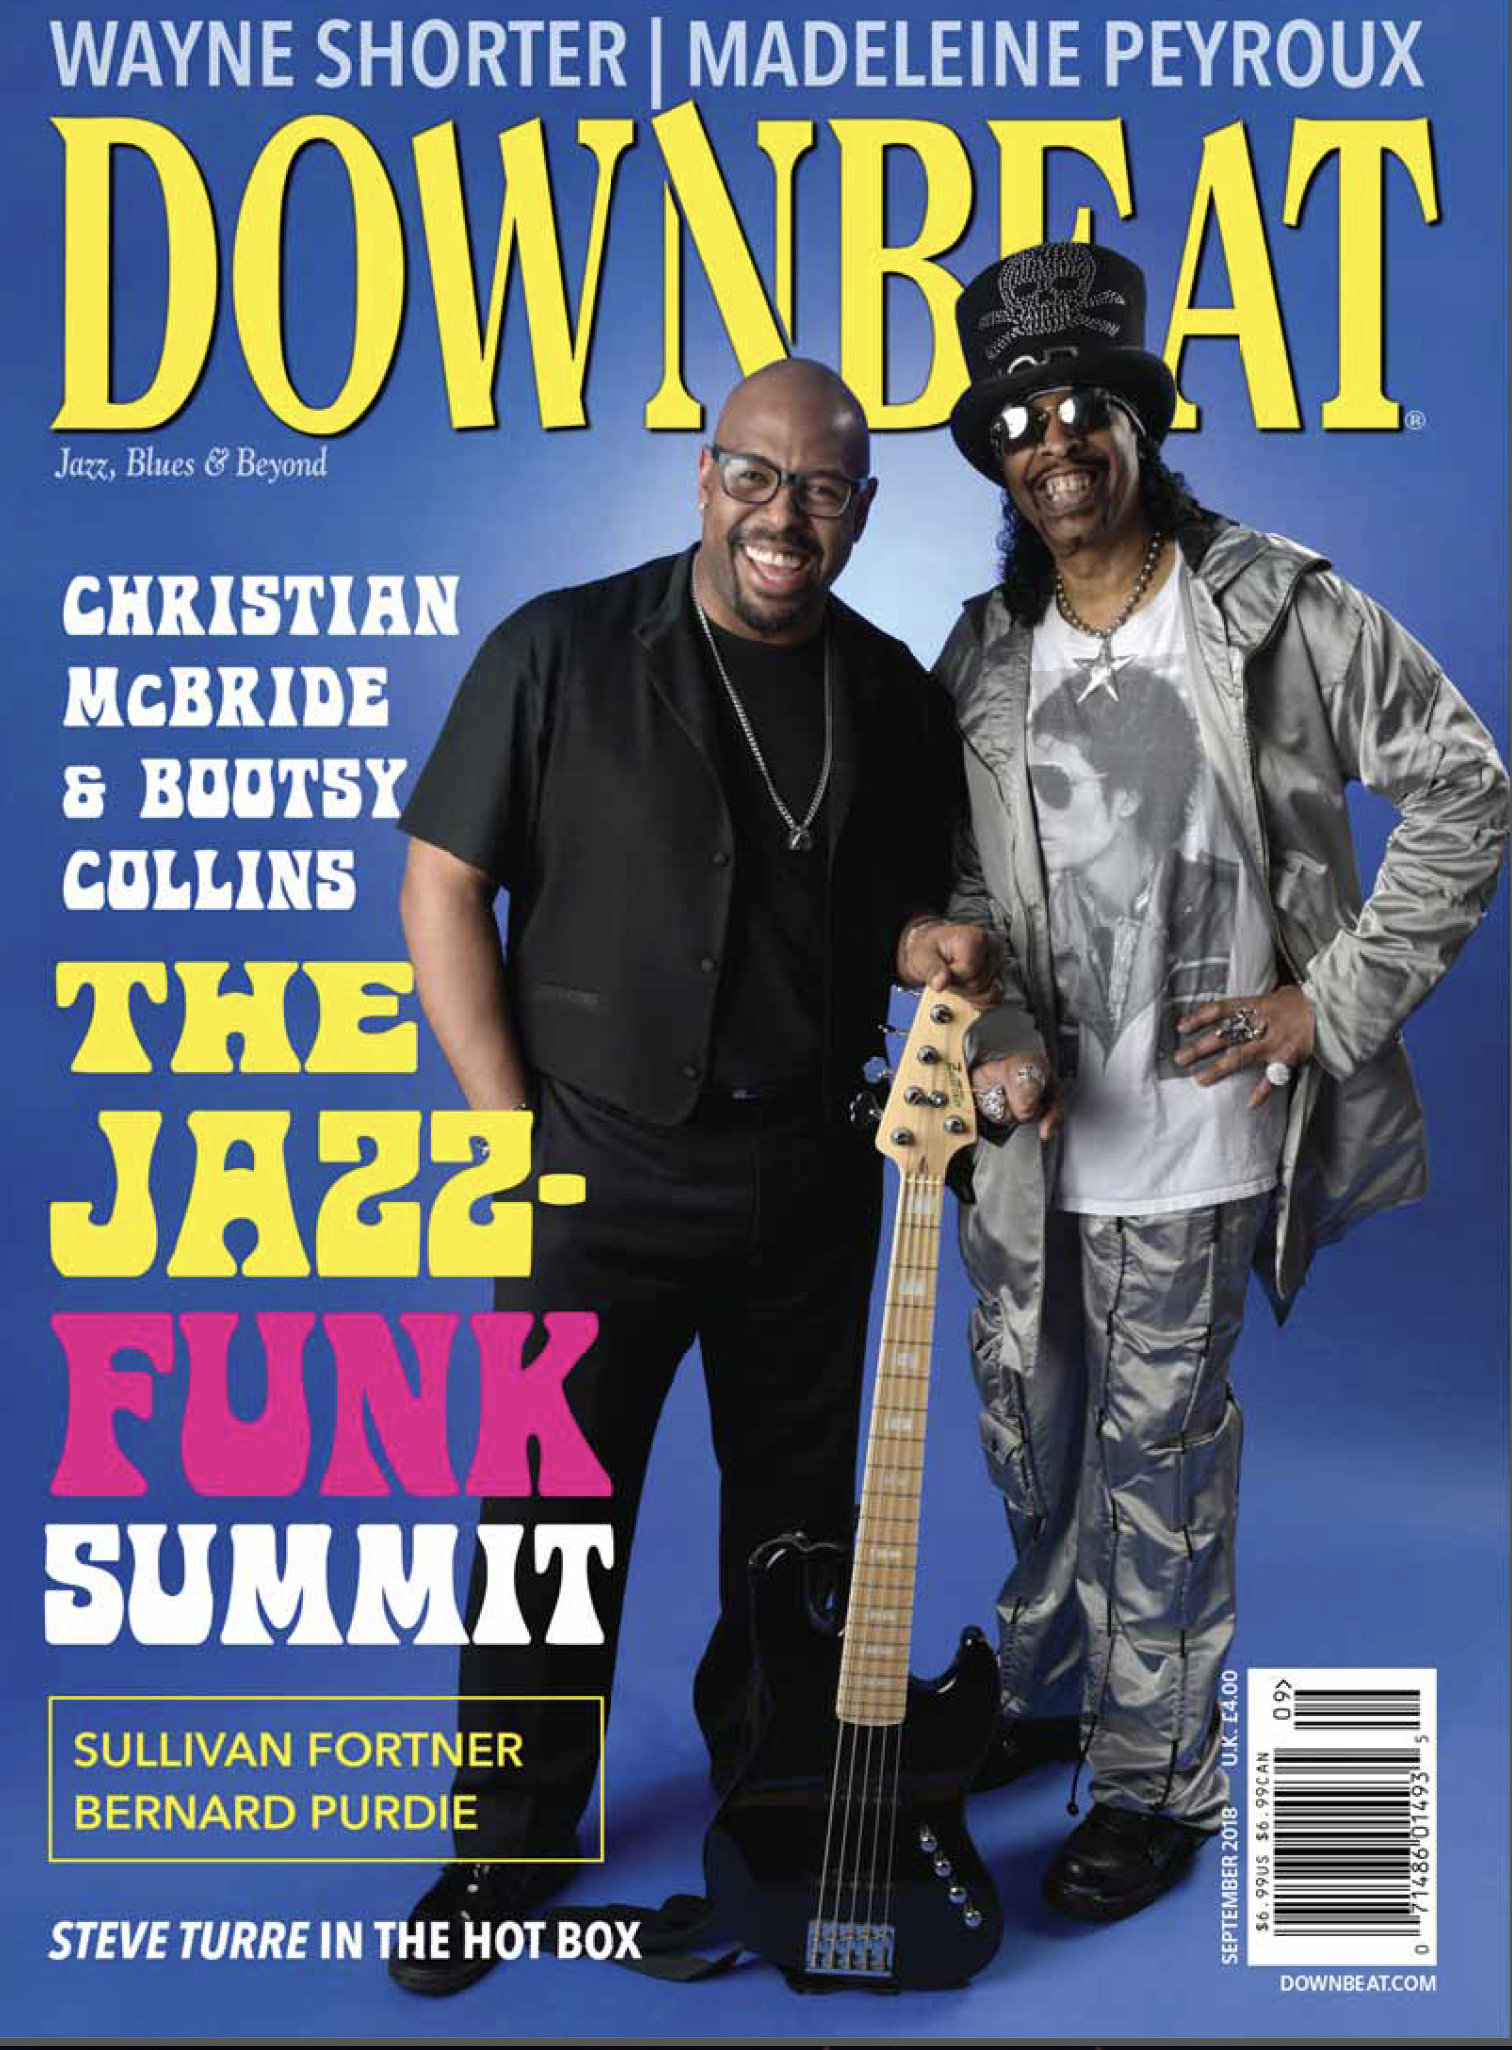 A magazine cover with two men holding guitars.